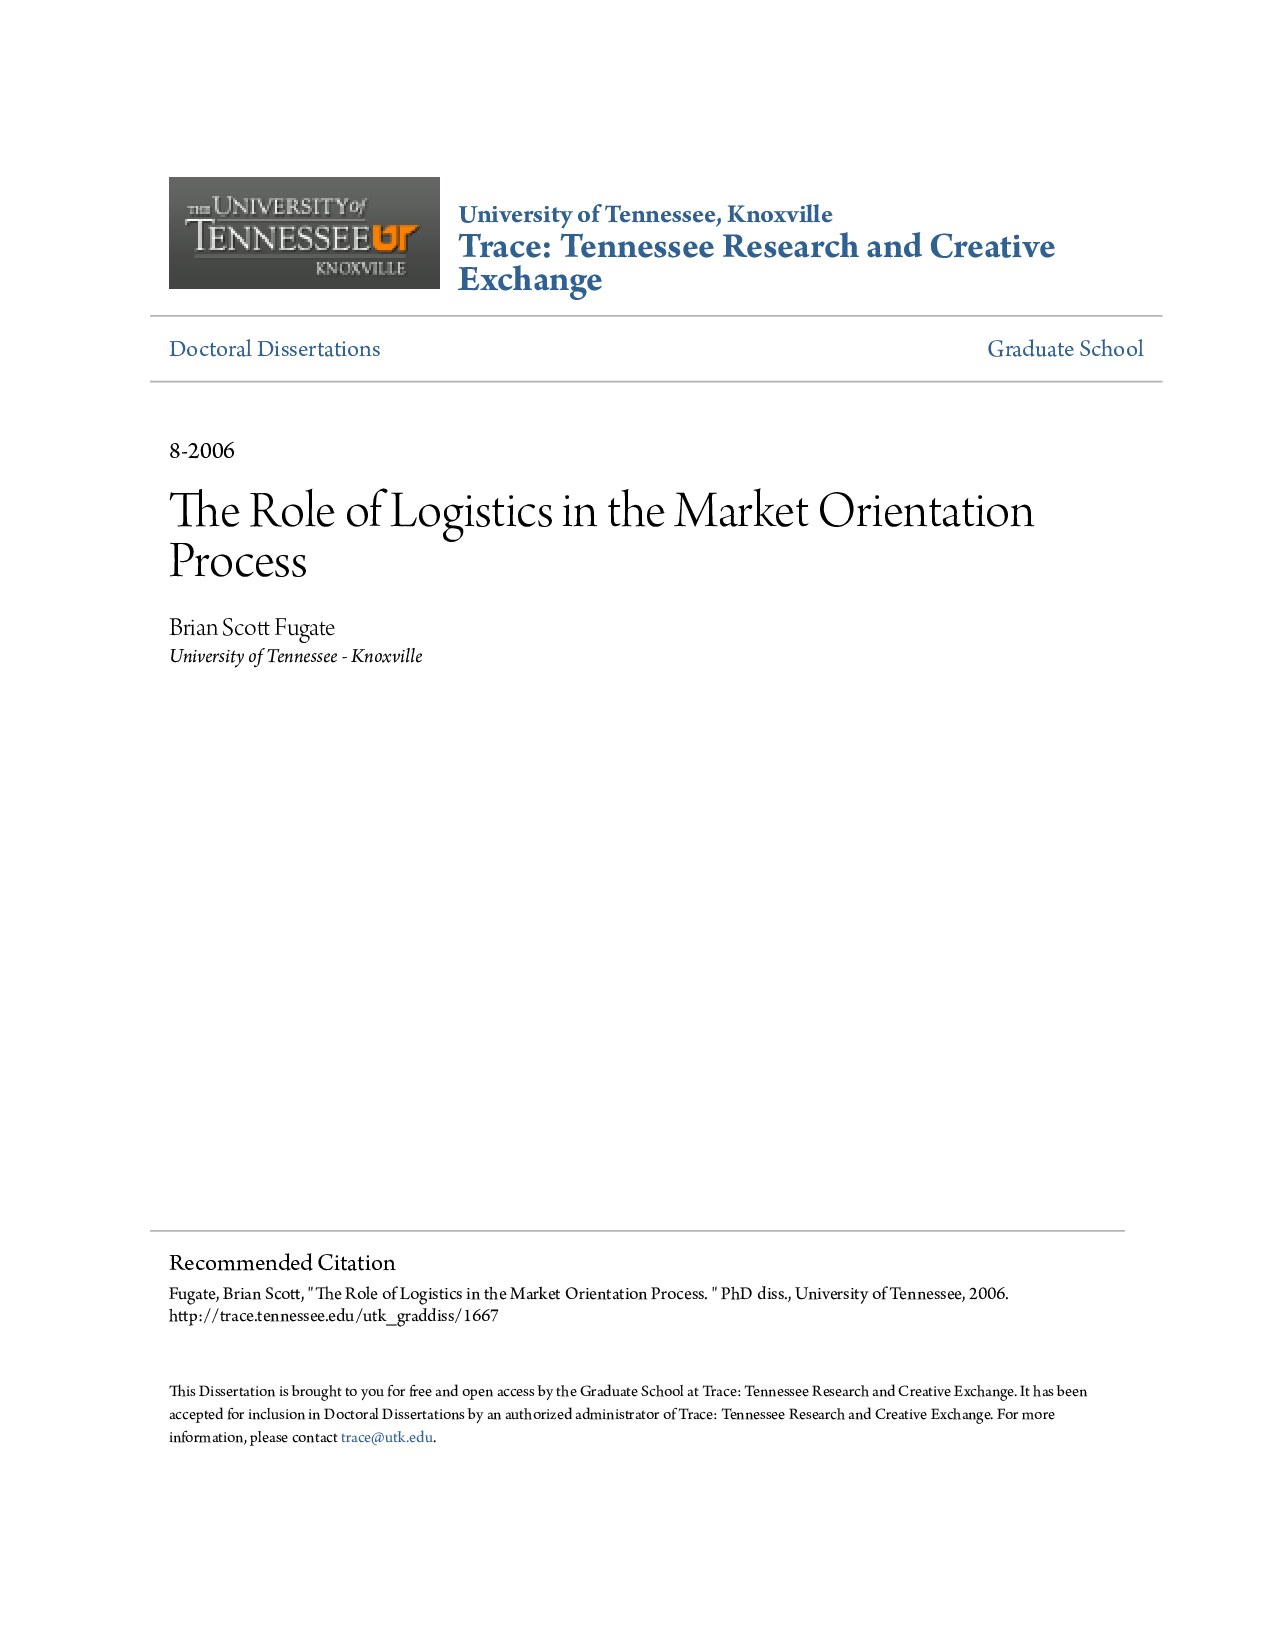 The Role of Logistics in the Market Orientation Process